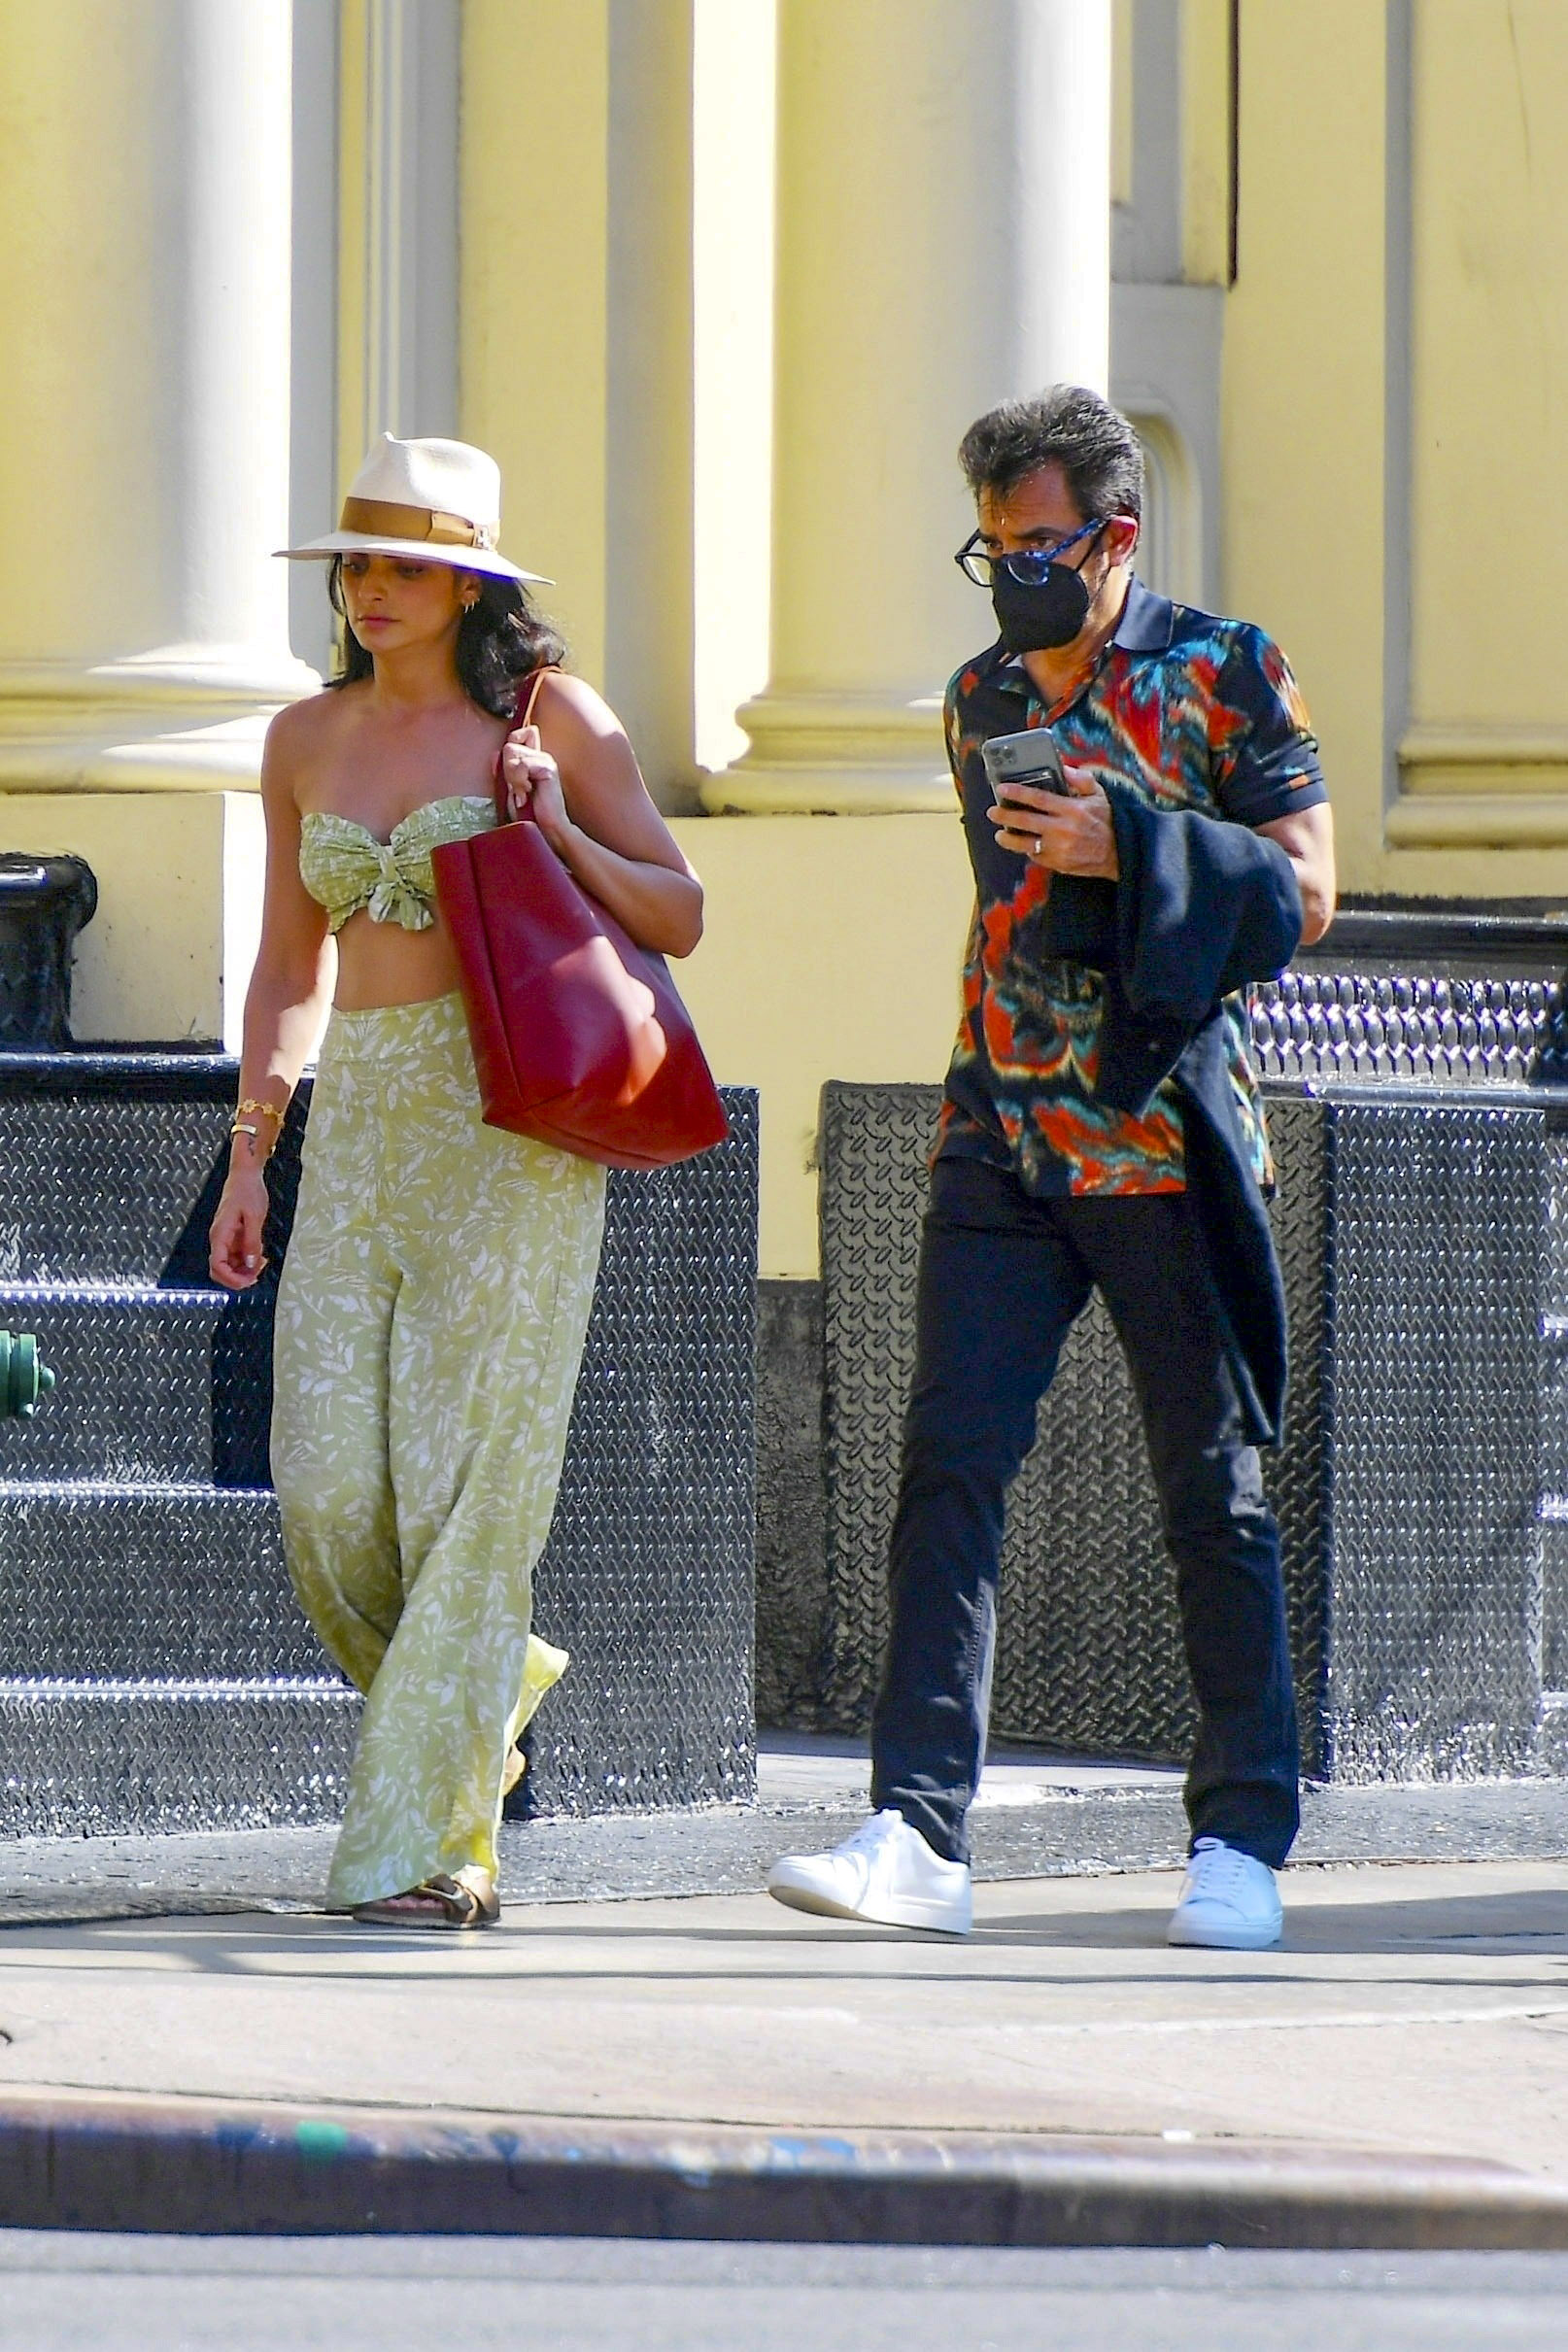 Photo © 2021 Backgrid/The Grosby Group

EXCLUSIVE

New York, NY  - Eugenio Derbez and daughter Aislinn were pictured exiting the "Frenchette" after enjoying lunch.

Pictured: Eugenio Derbez, Aislinn Derbez

24 AUGUST 2021